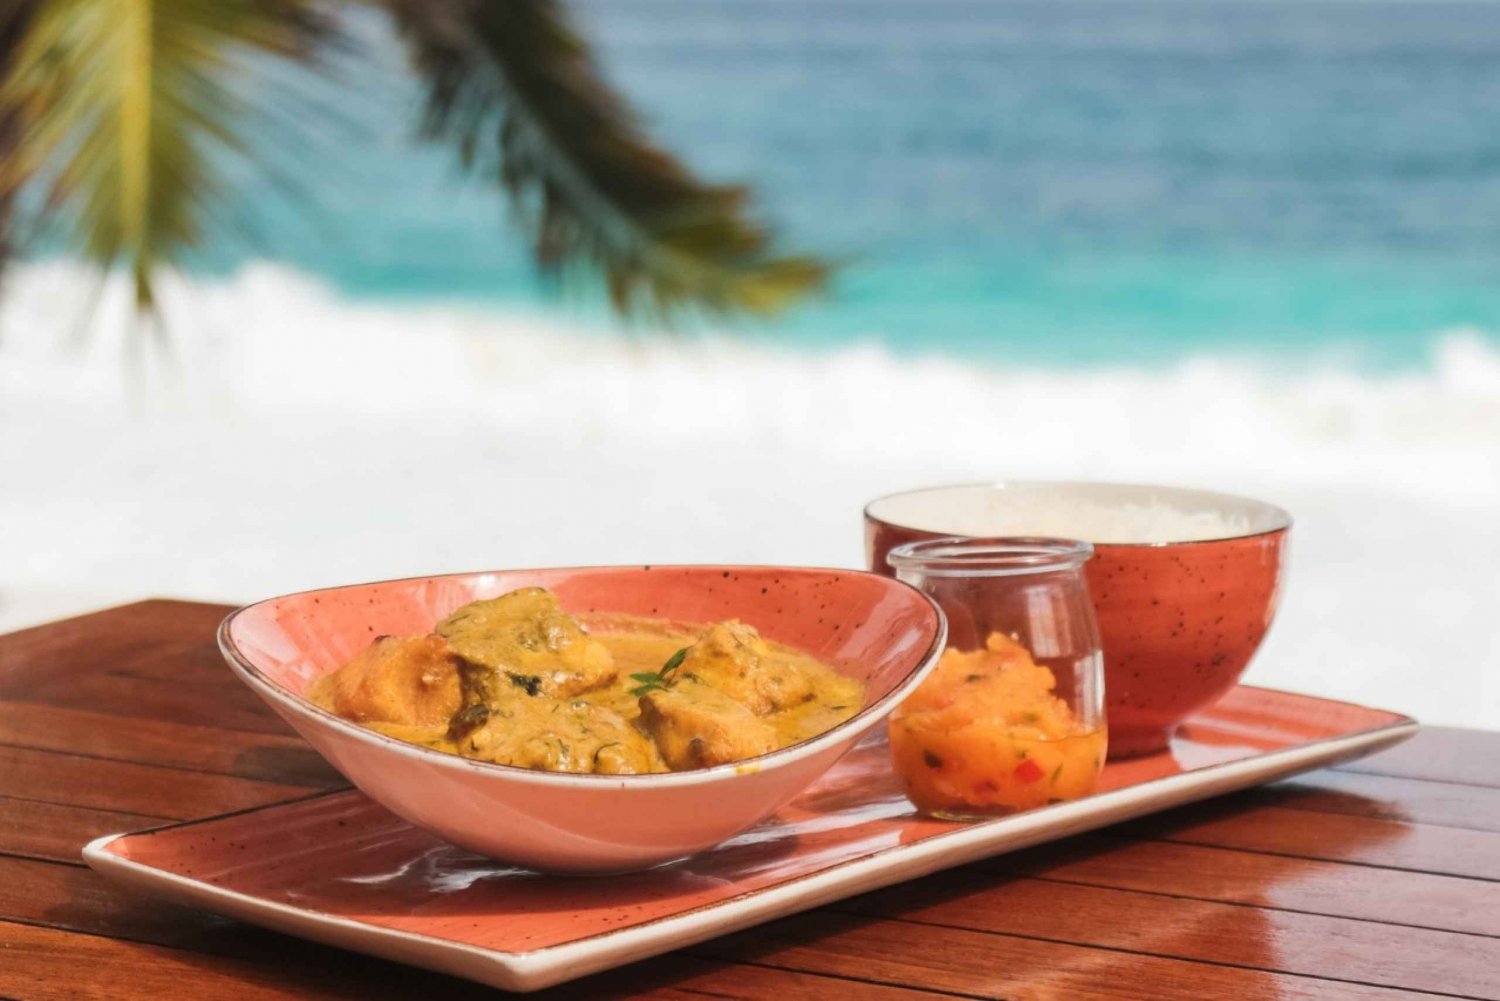 Anse Etoile: Beach House Cooking Class with Hotel Transfers